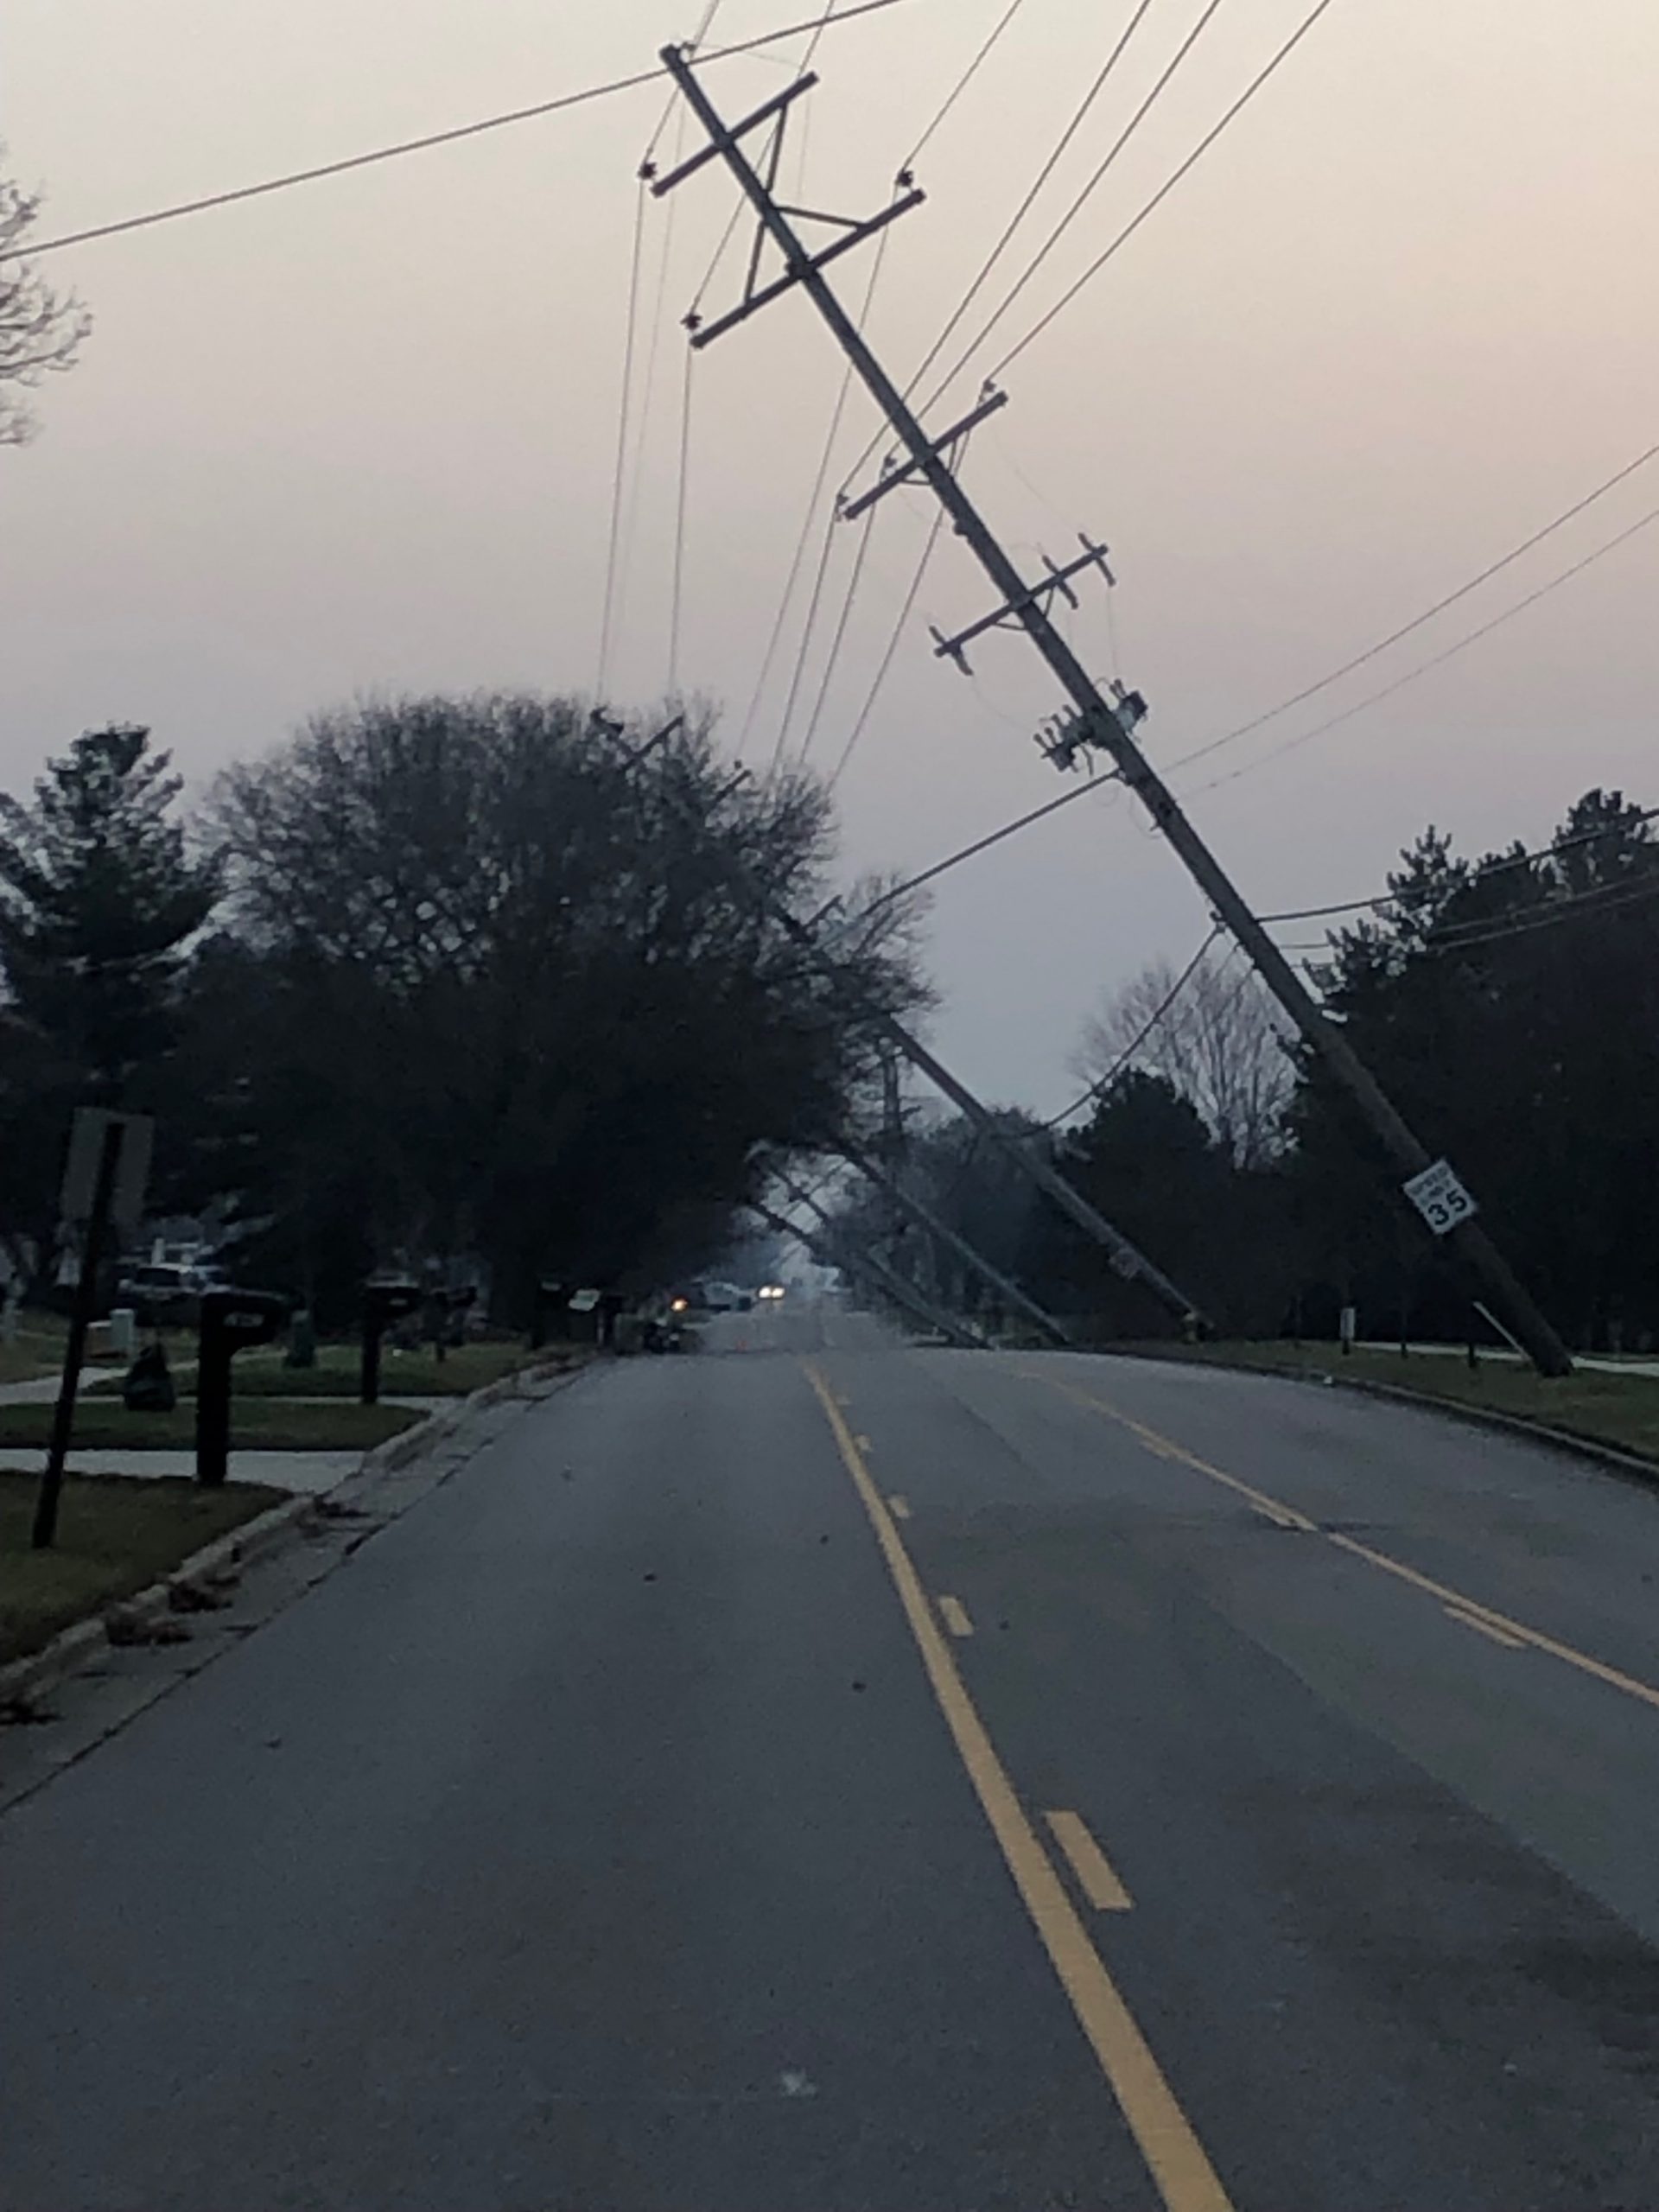 consumers-energy-works-to-restore-power-after-high-winds-cause-outages